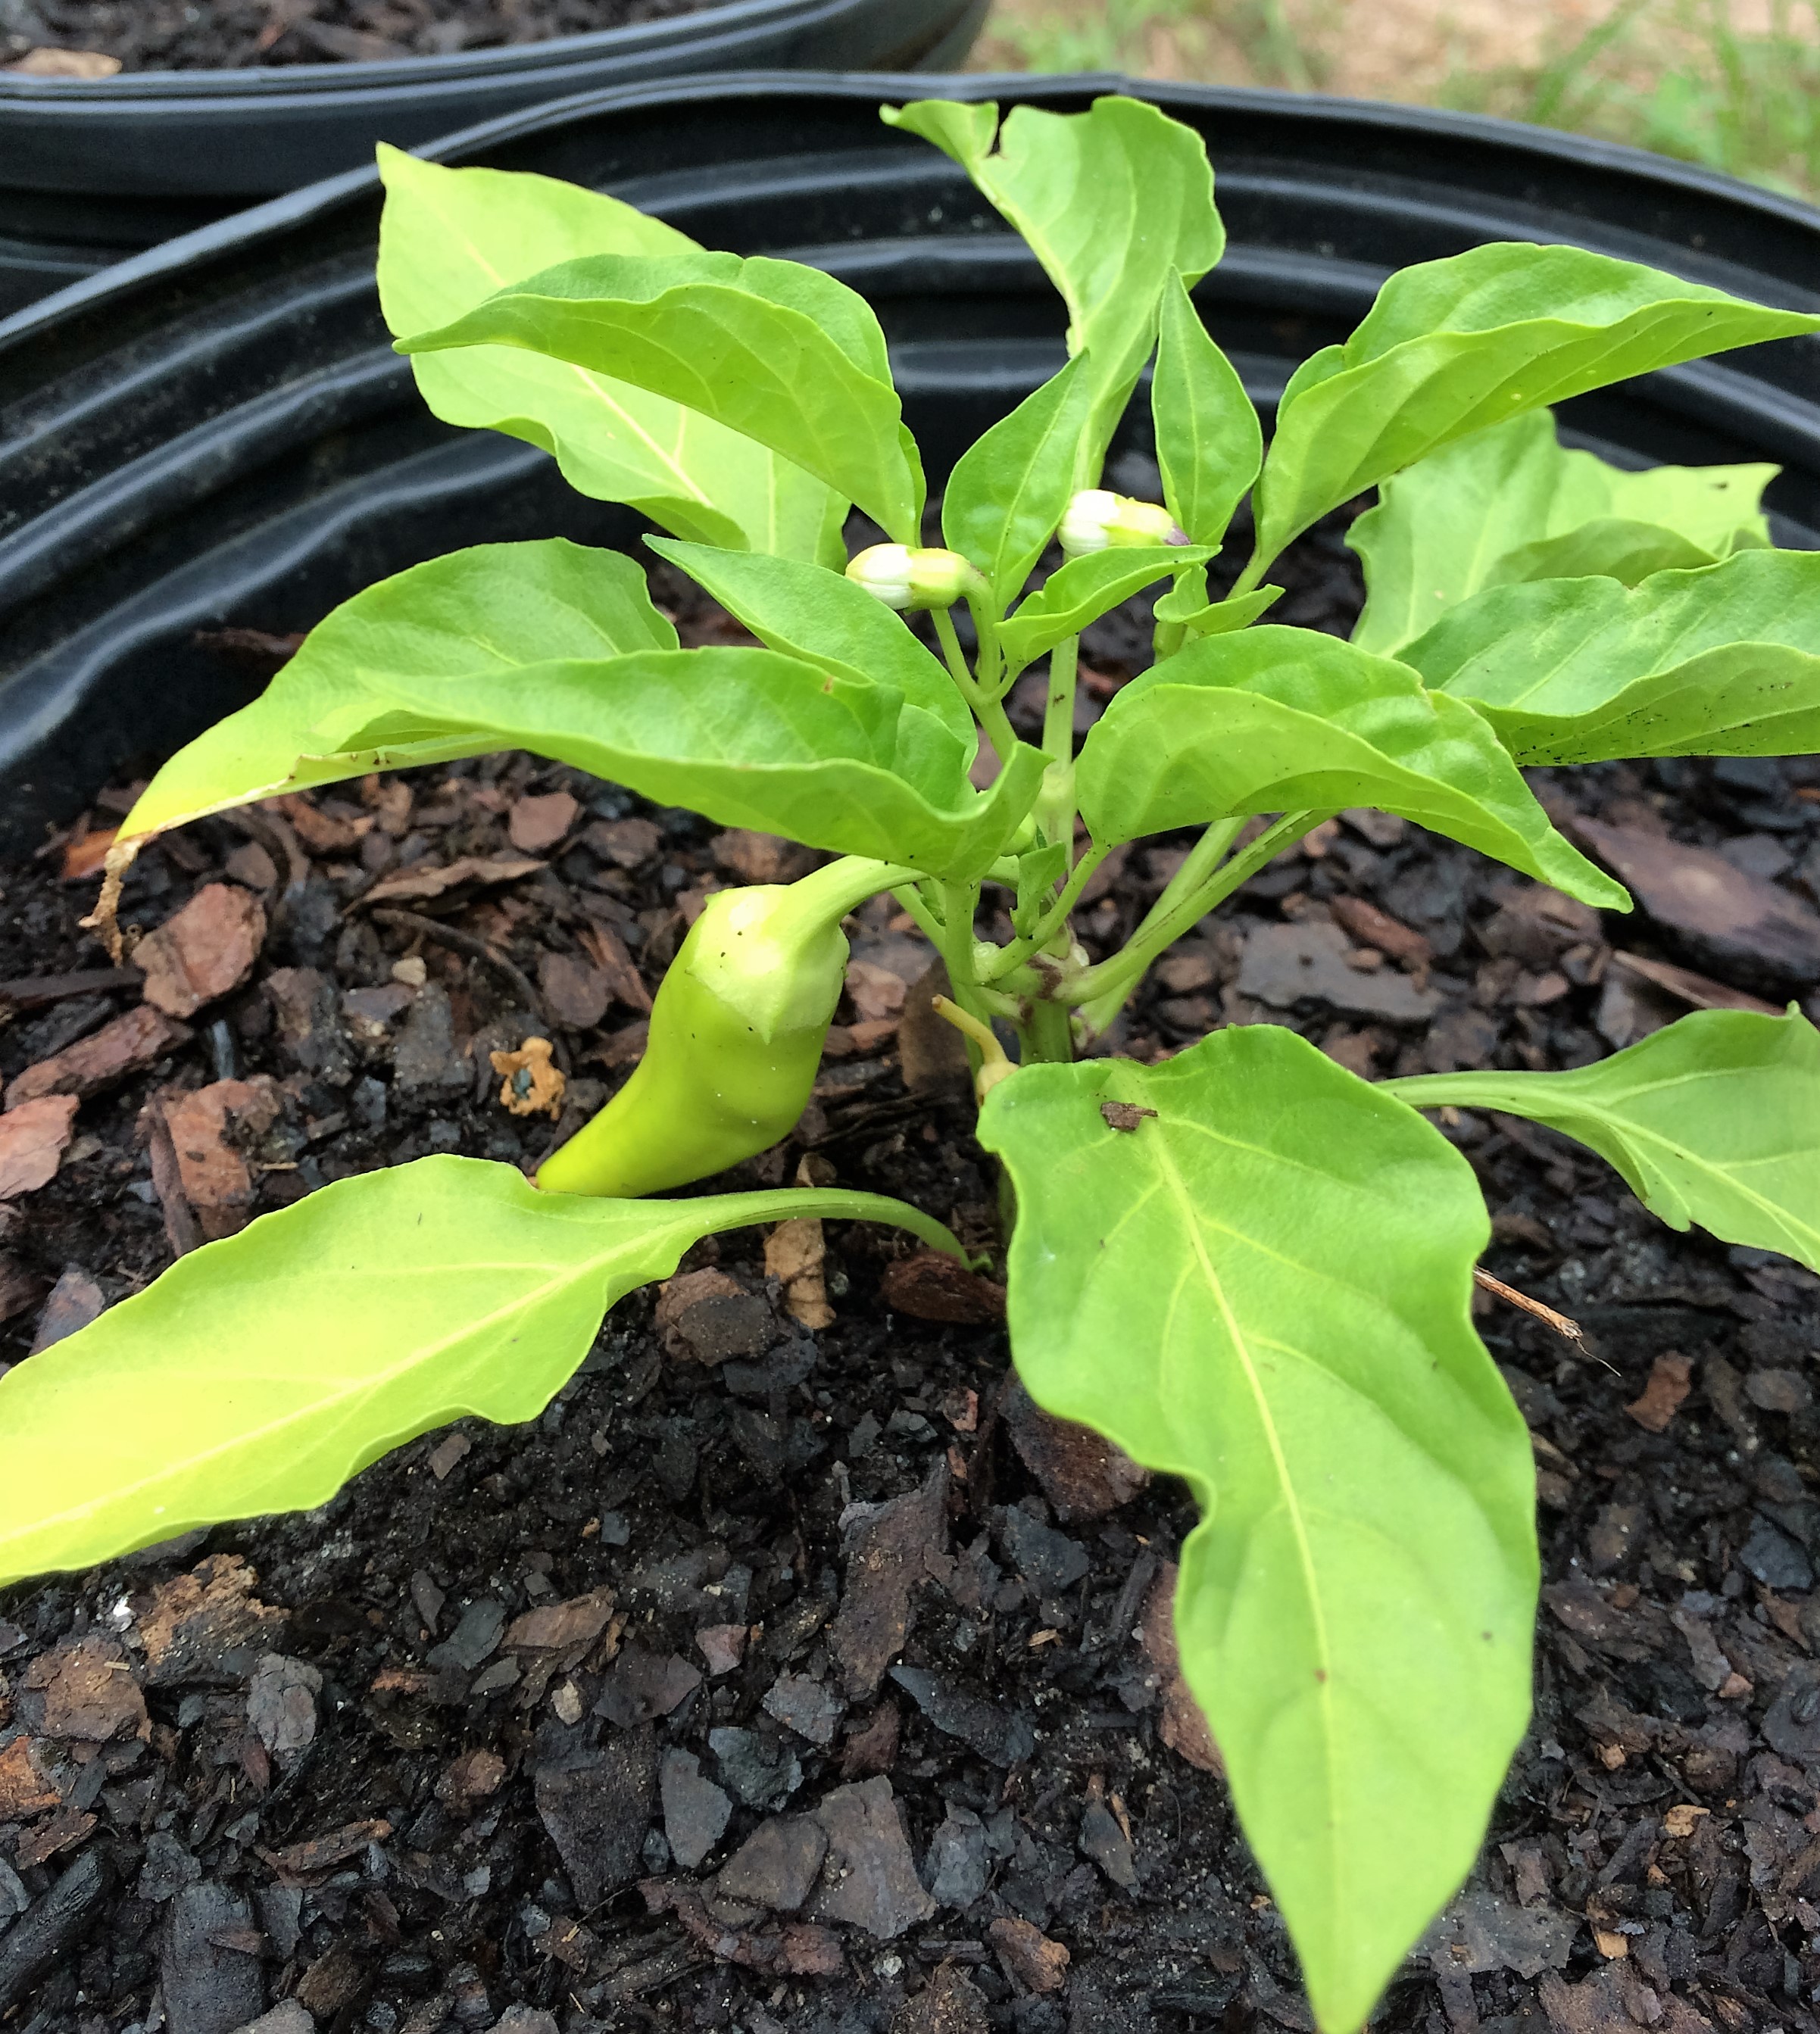 Should Pepper Seeds Be Saved?